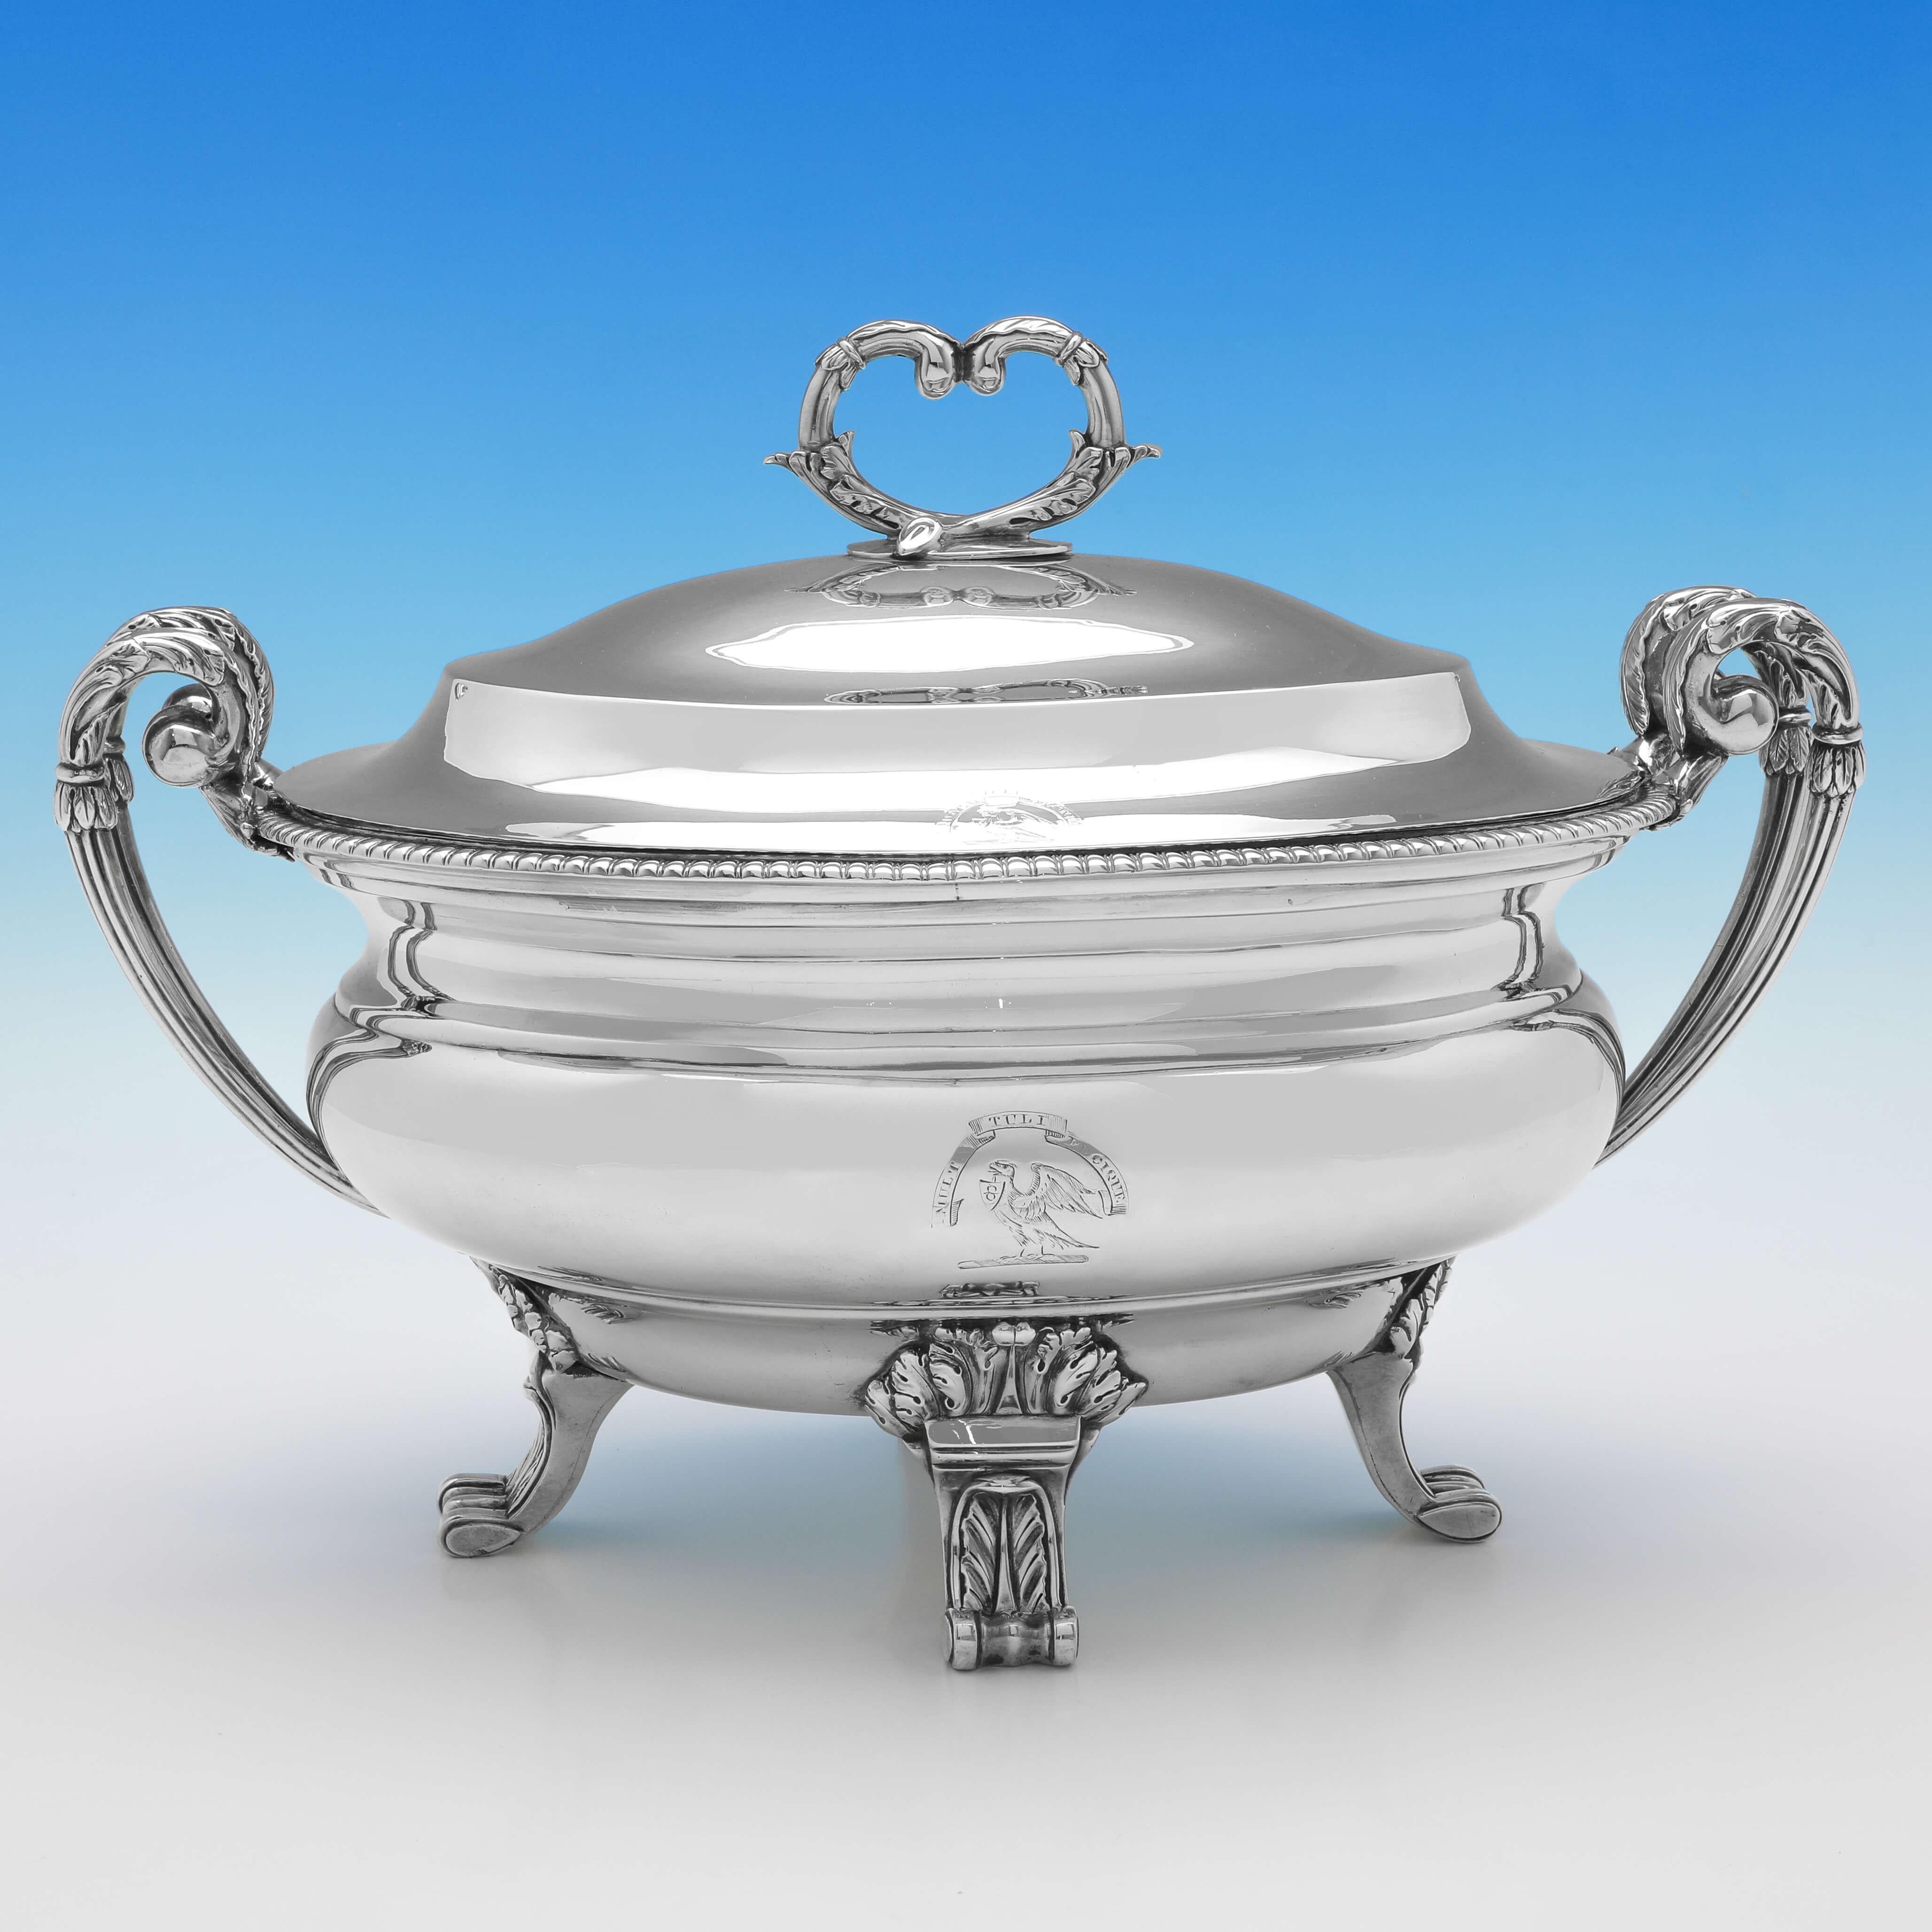 Neoclassical George III Antique Sterling Silver Soup Tureen, William Pitts, 1799 For Sale